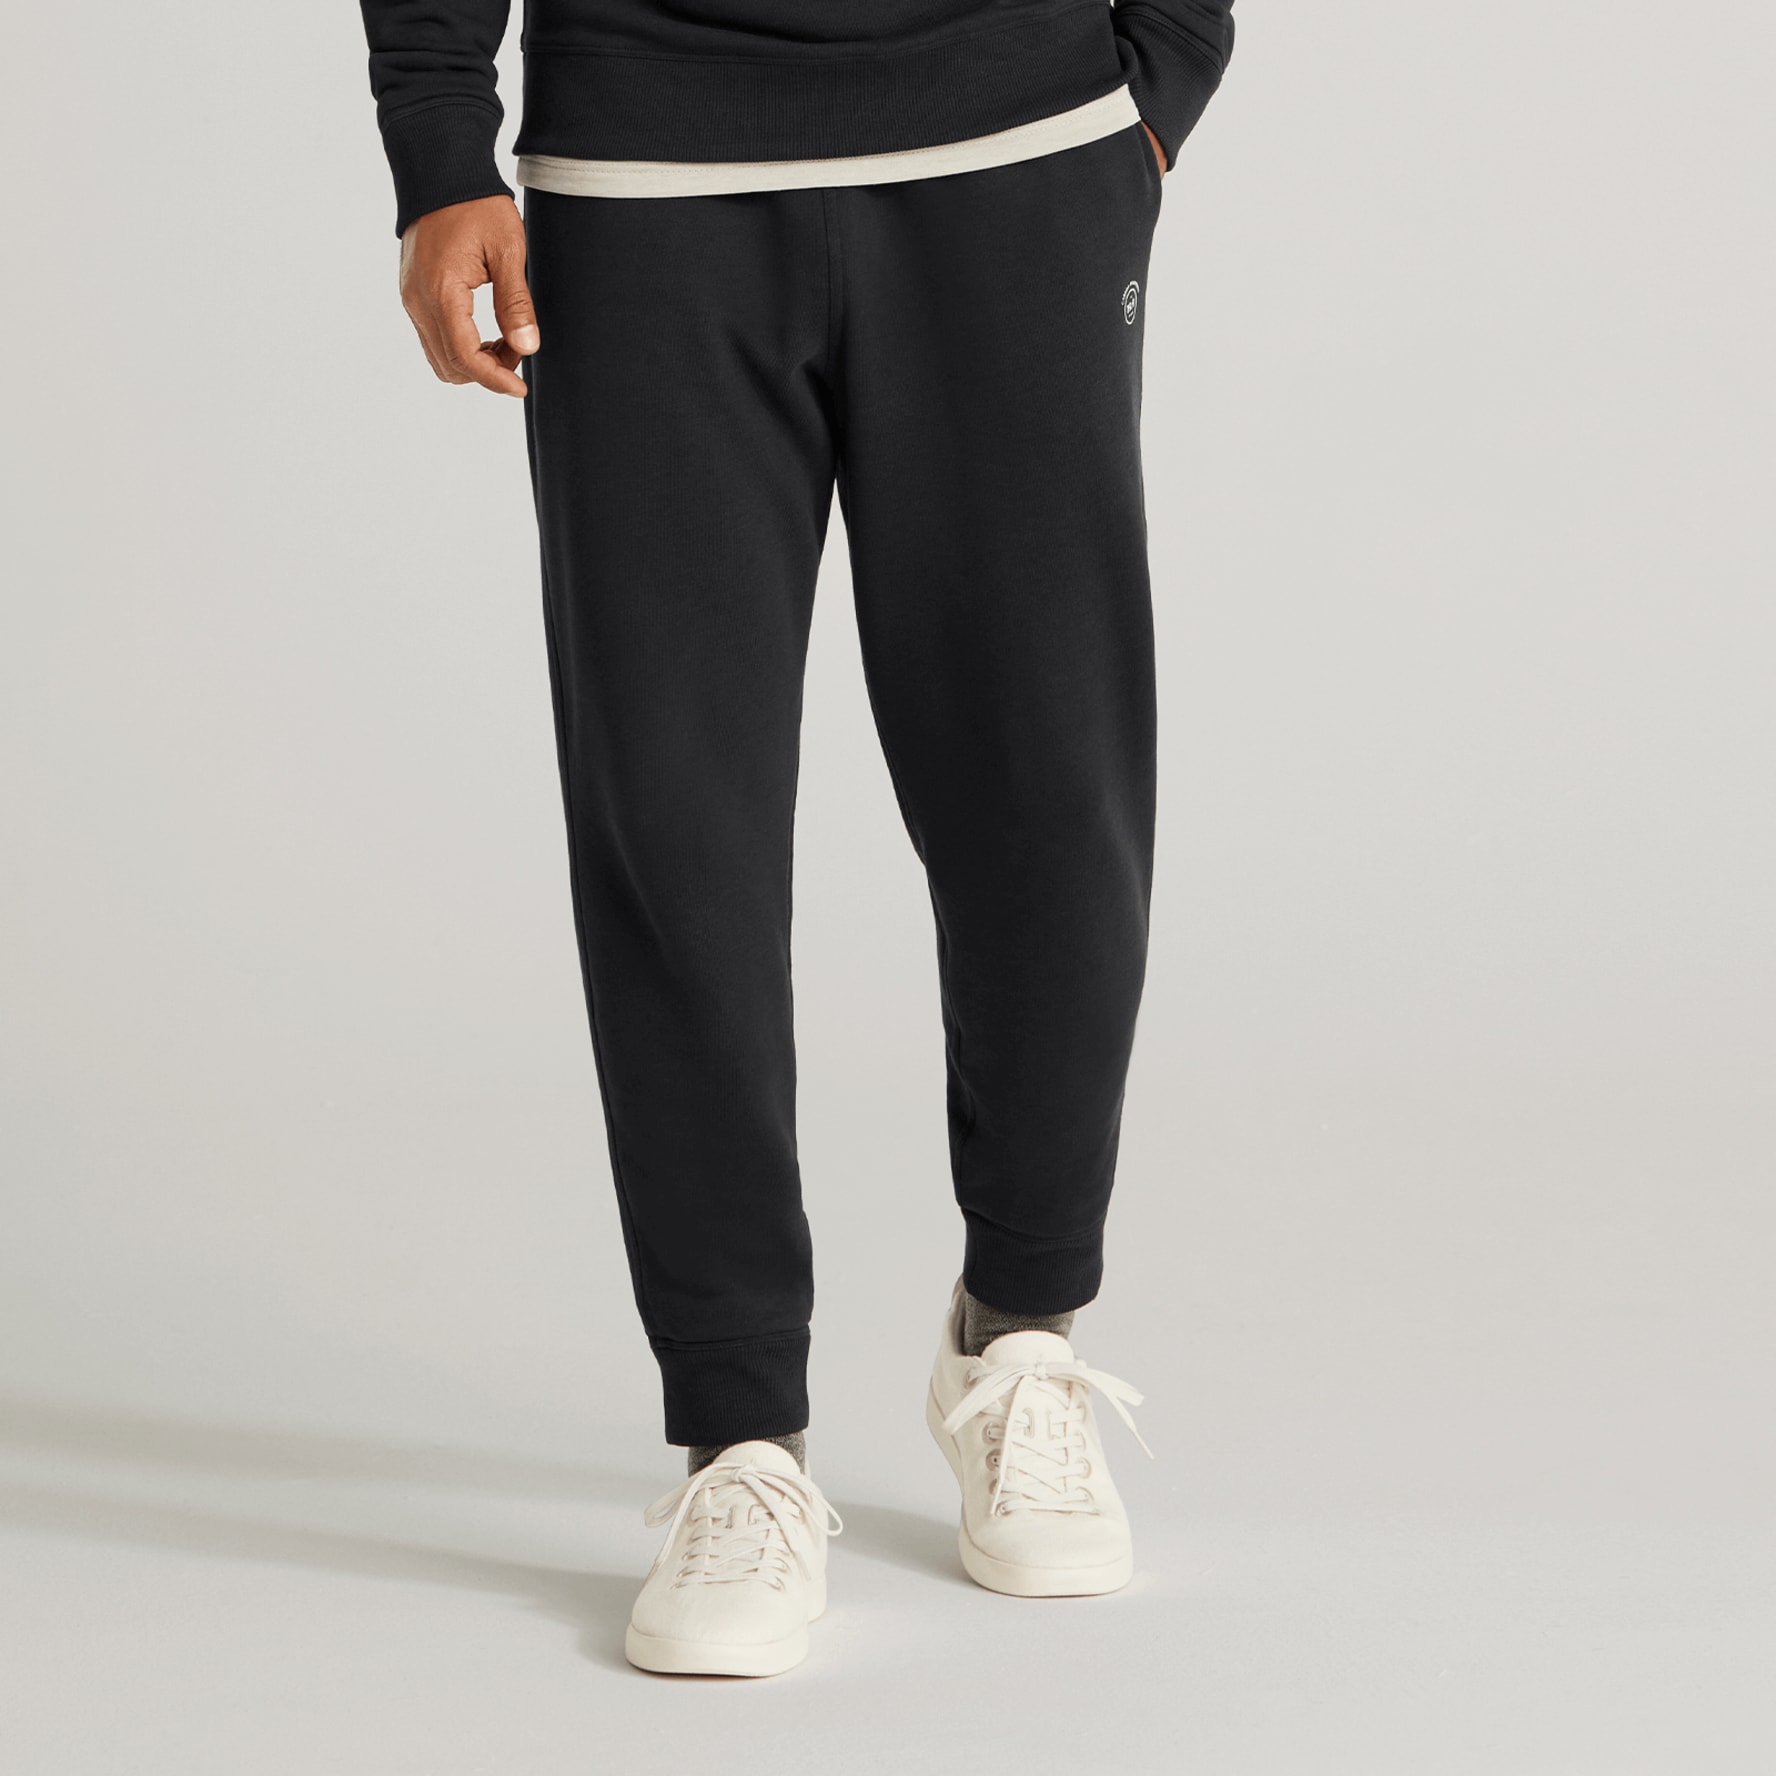 How Should Mens Joggers Fit? – Greatness Wins